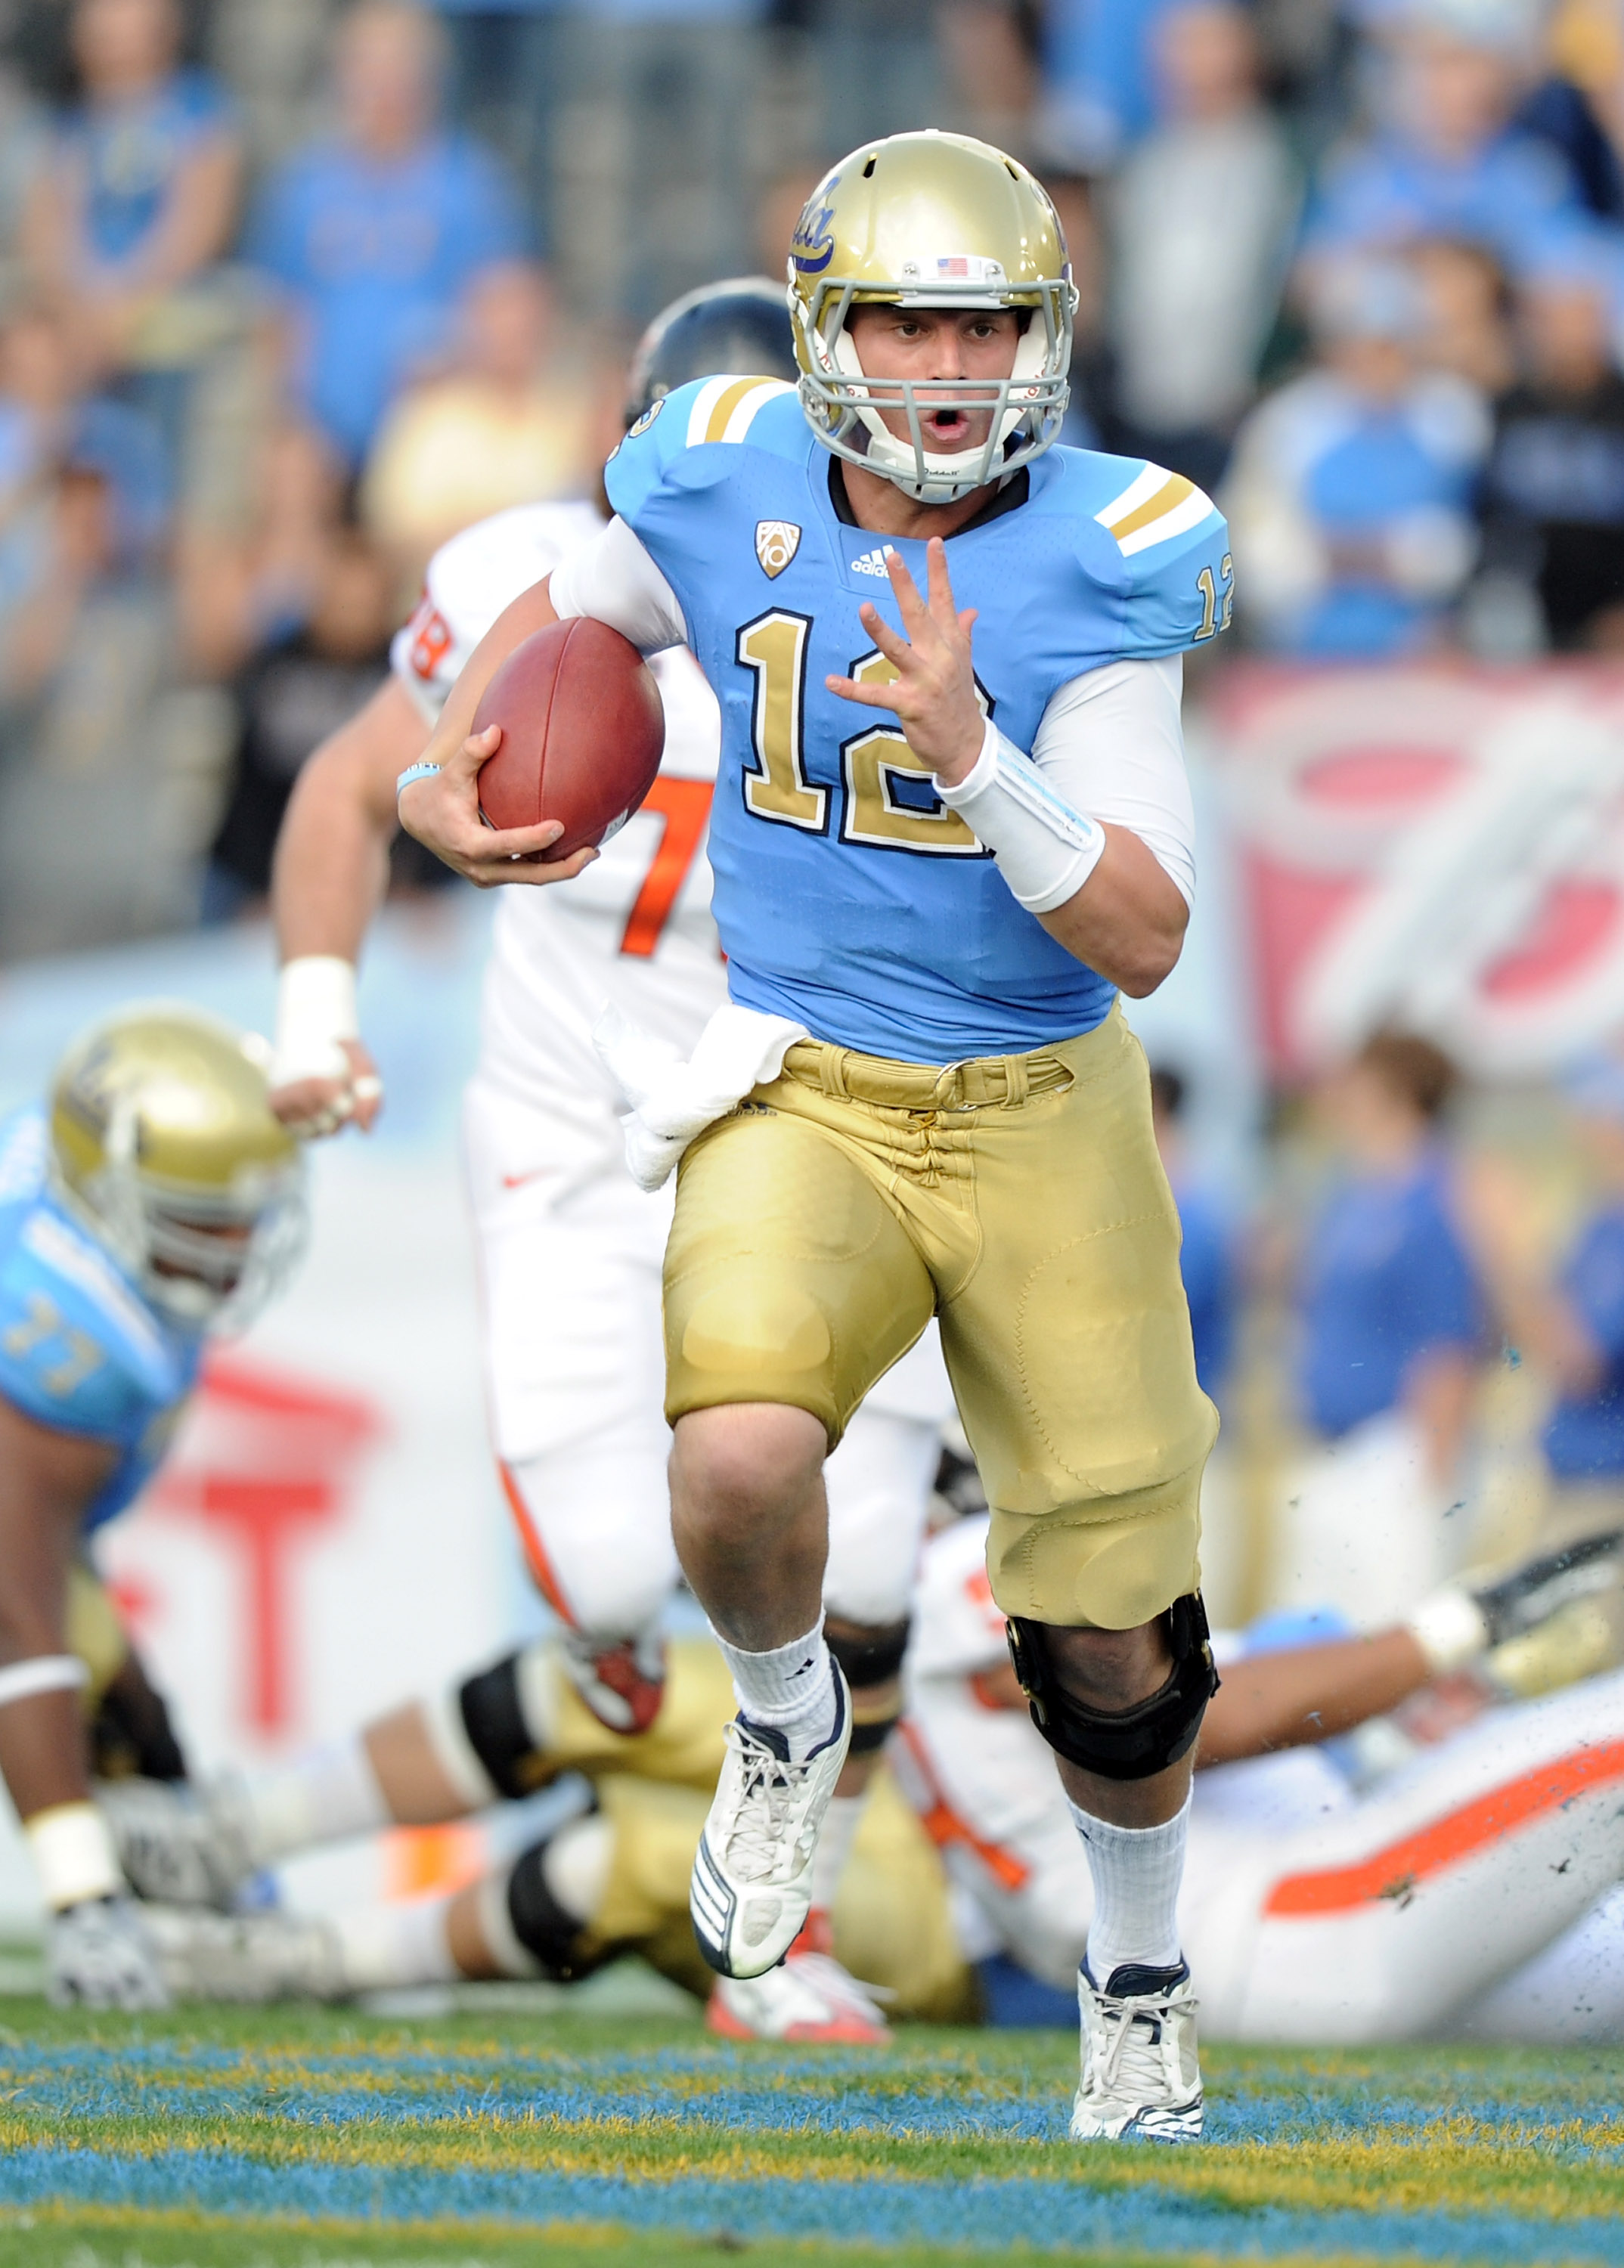 PASADENA, CA - NOVEMBER 06:  Richard Brehaut #12 of the UCLA Bruins runs down field against the Oregon State Beavers at the Rose Bowl on November 6, 2010 in Pasadena, California.  (Photo by Harry How/Getty Images)